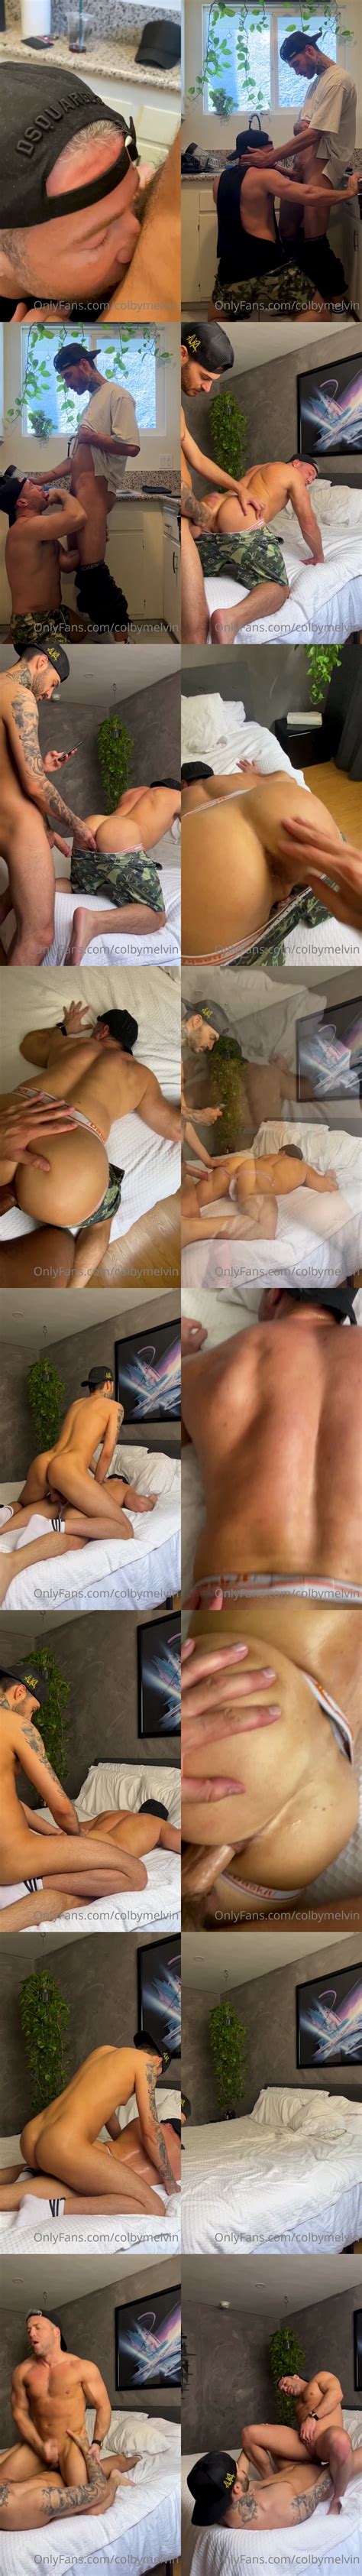 Onlyfans Colby Melvin With Big Dick Fig Hot Men Universe